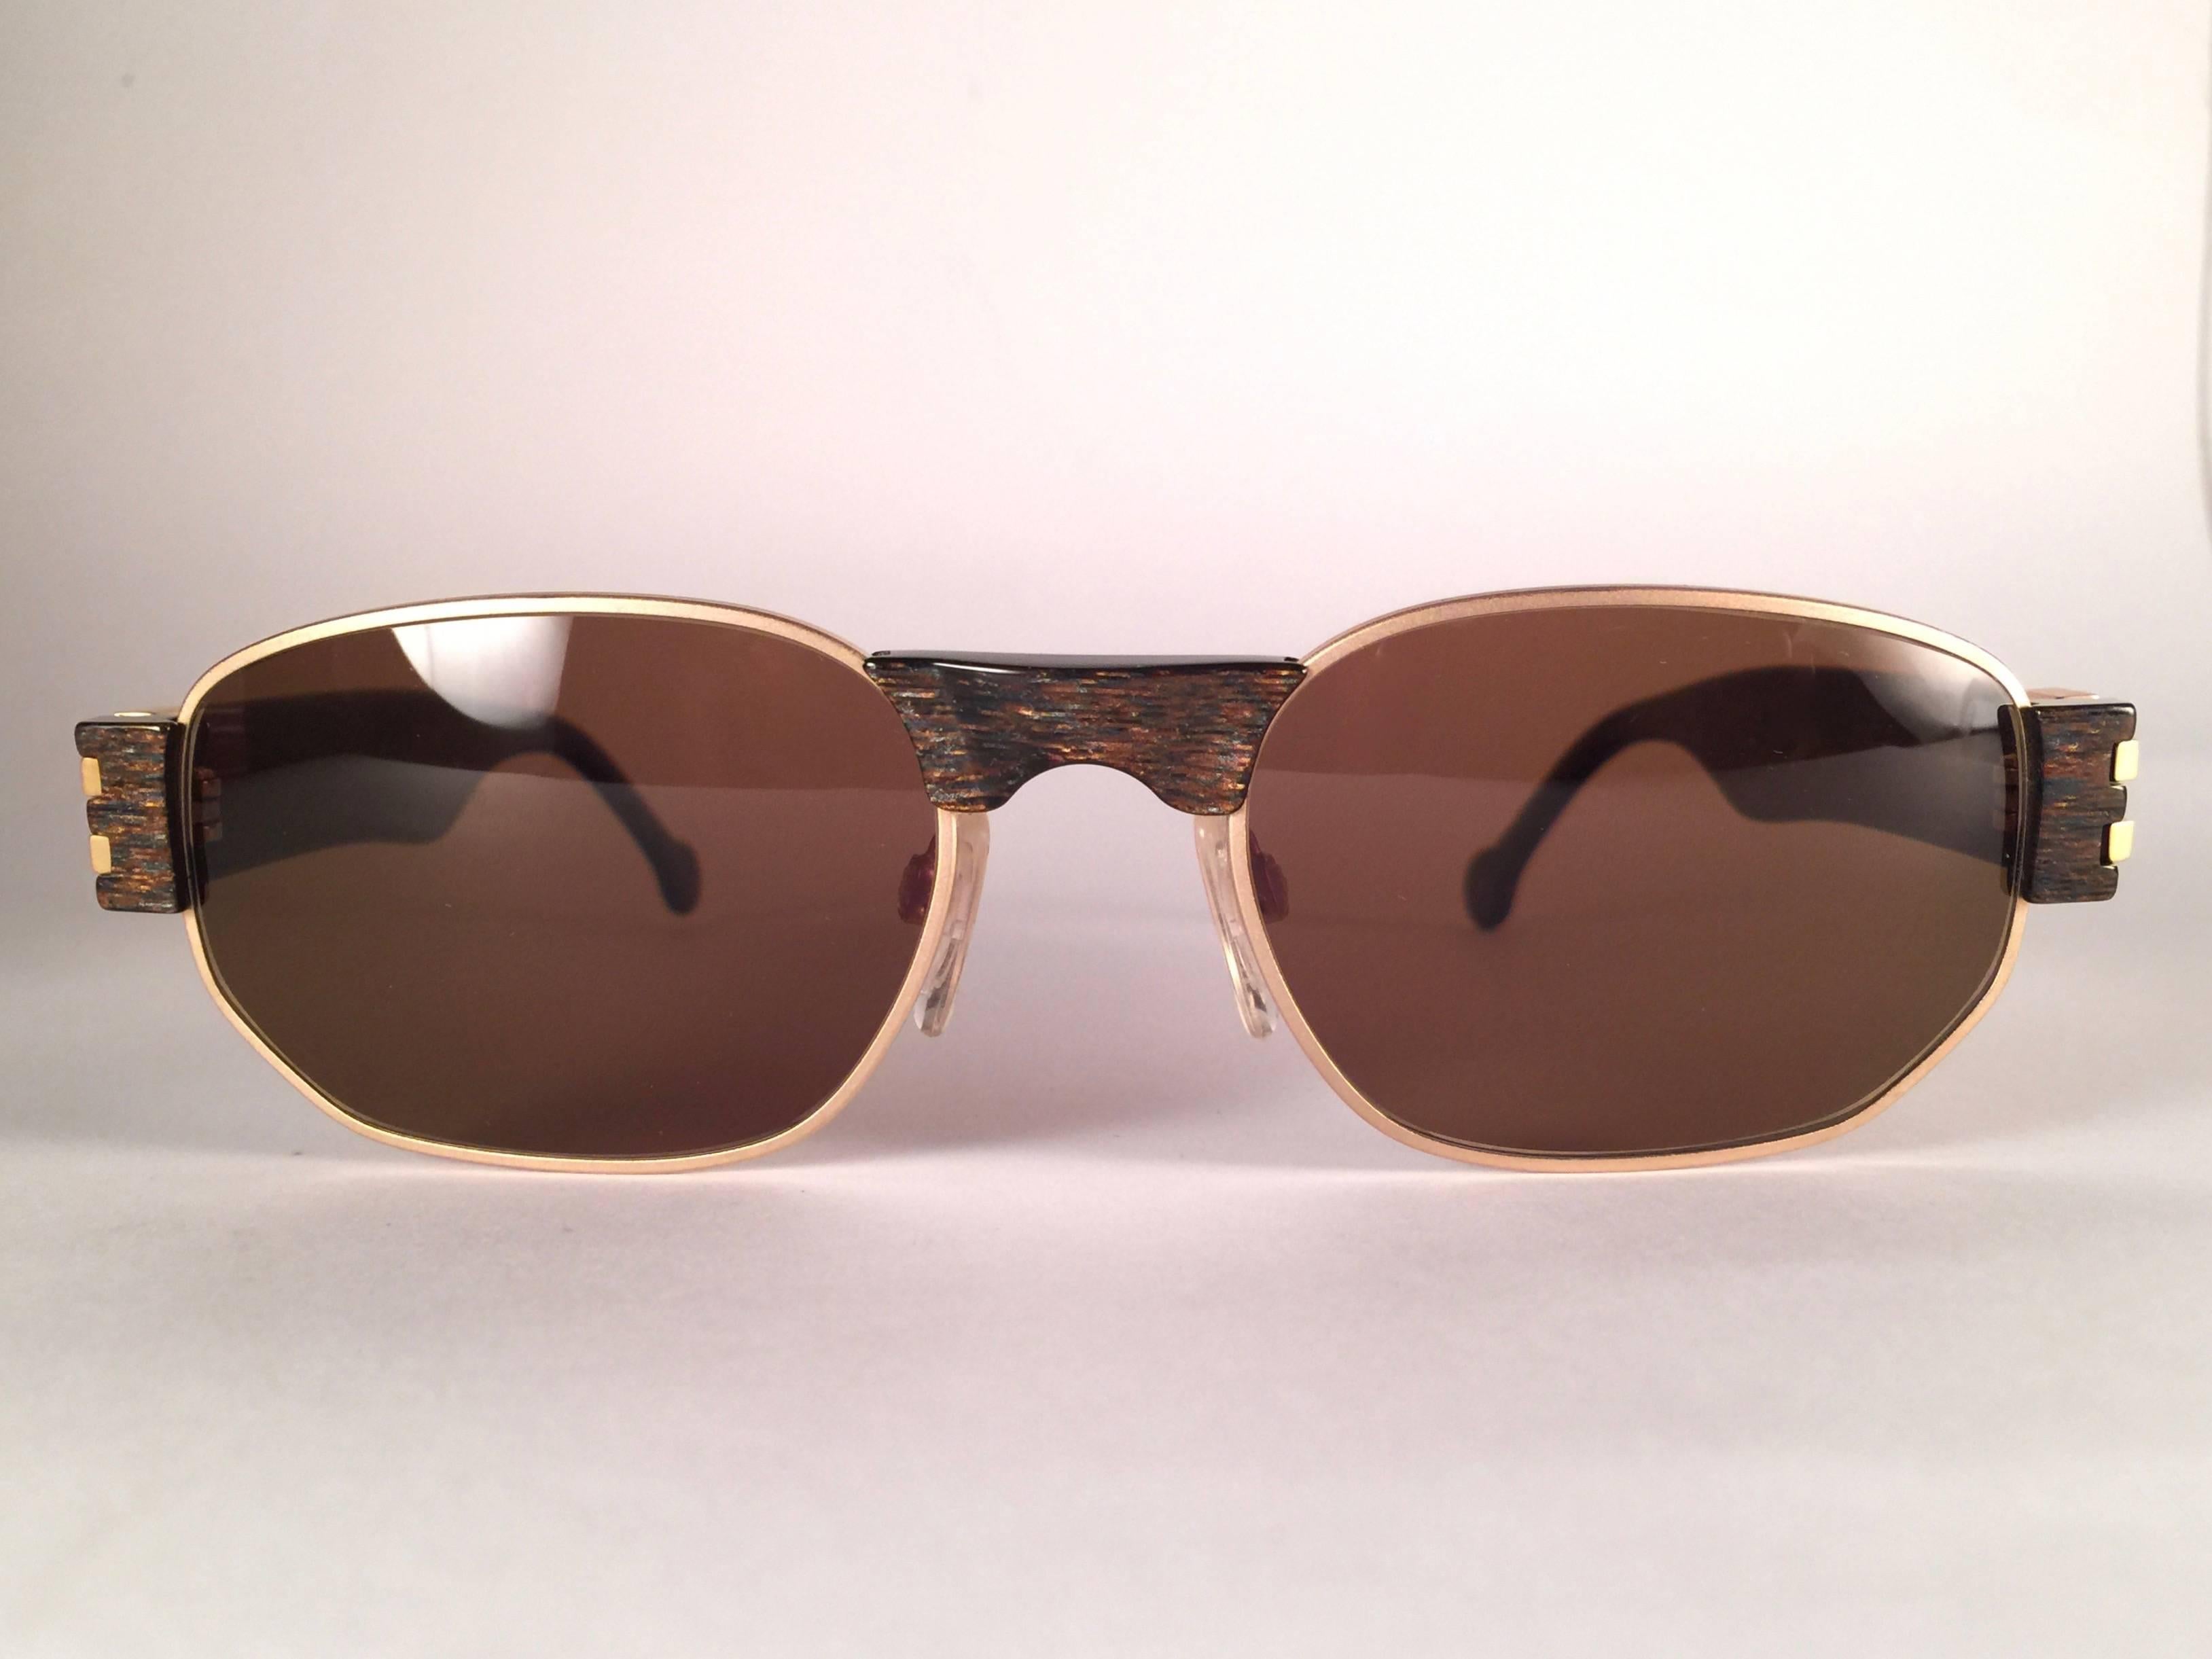 New, never worn Karl Lagerfeld matte gold with translucent stripes frame holding a spotless pair of solid brown lenses.  
Designed and produced in 1990's. 
New, never worn or displayed.
Made in Austria.